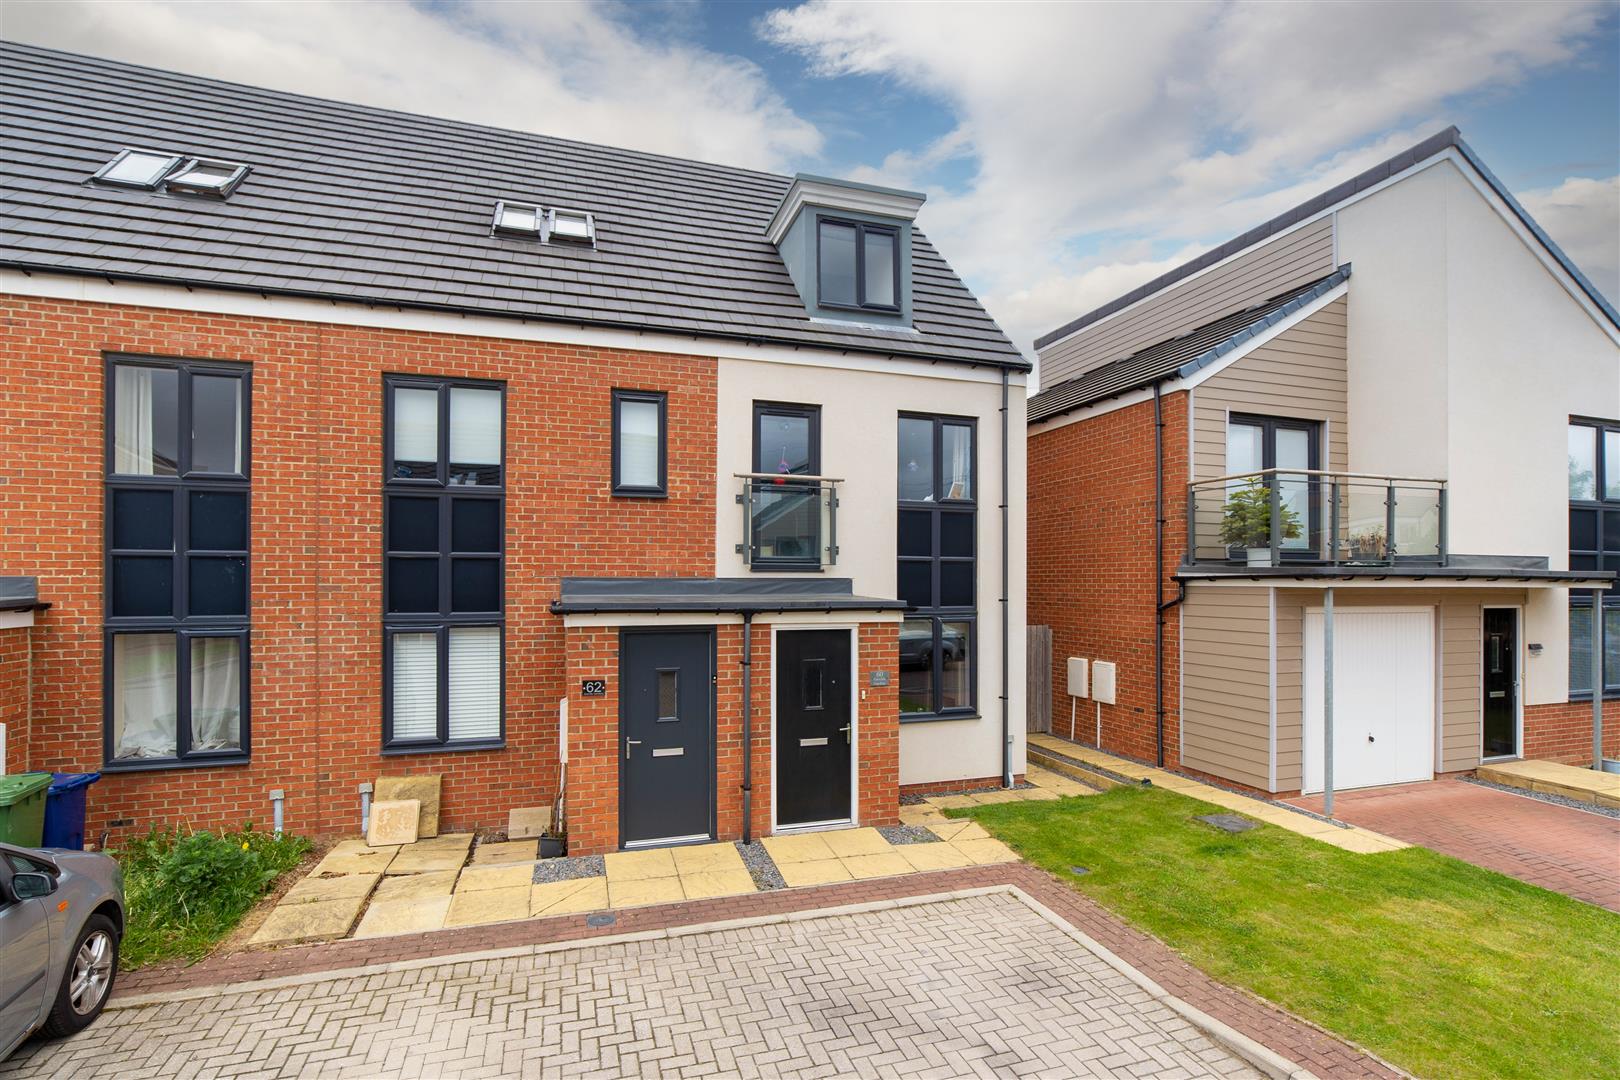 3 bed town house for sale in Greville Gardens, Great Park, NE13